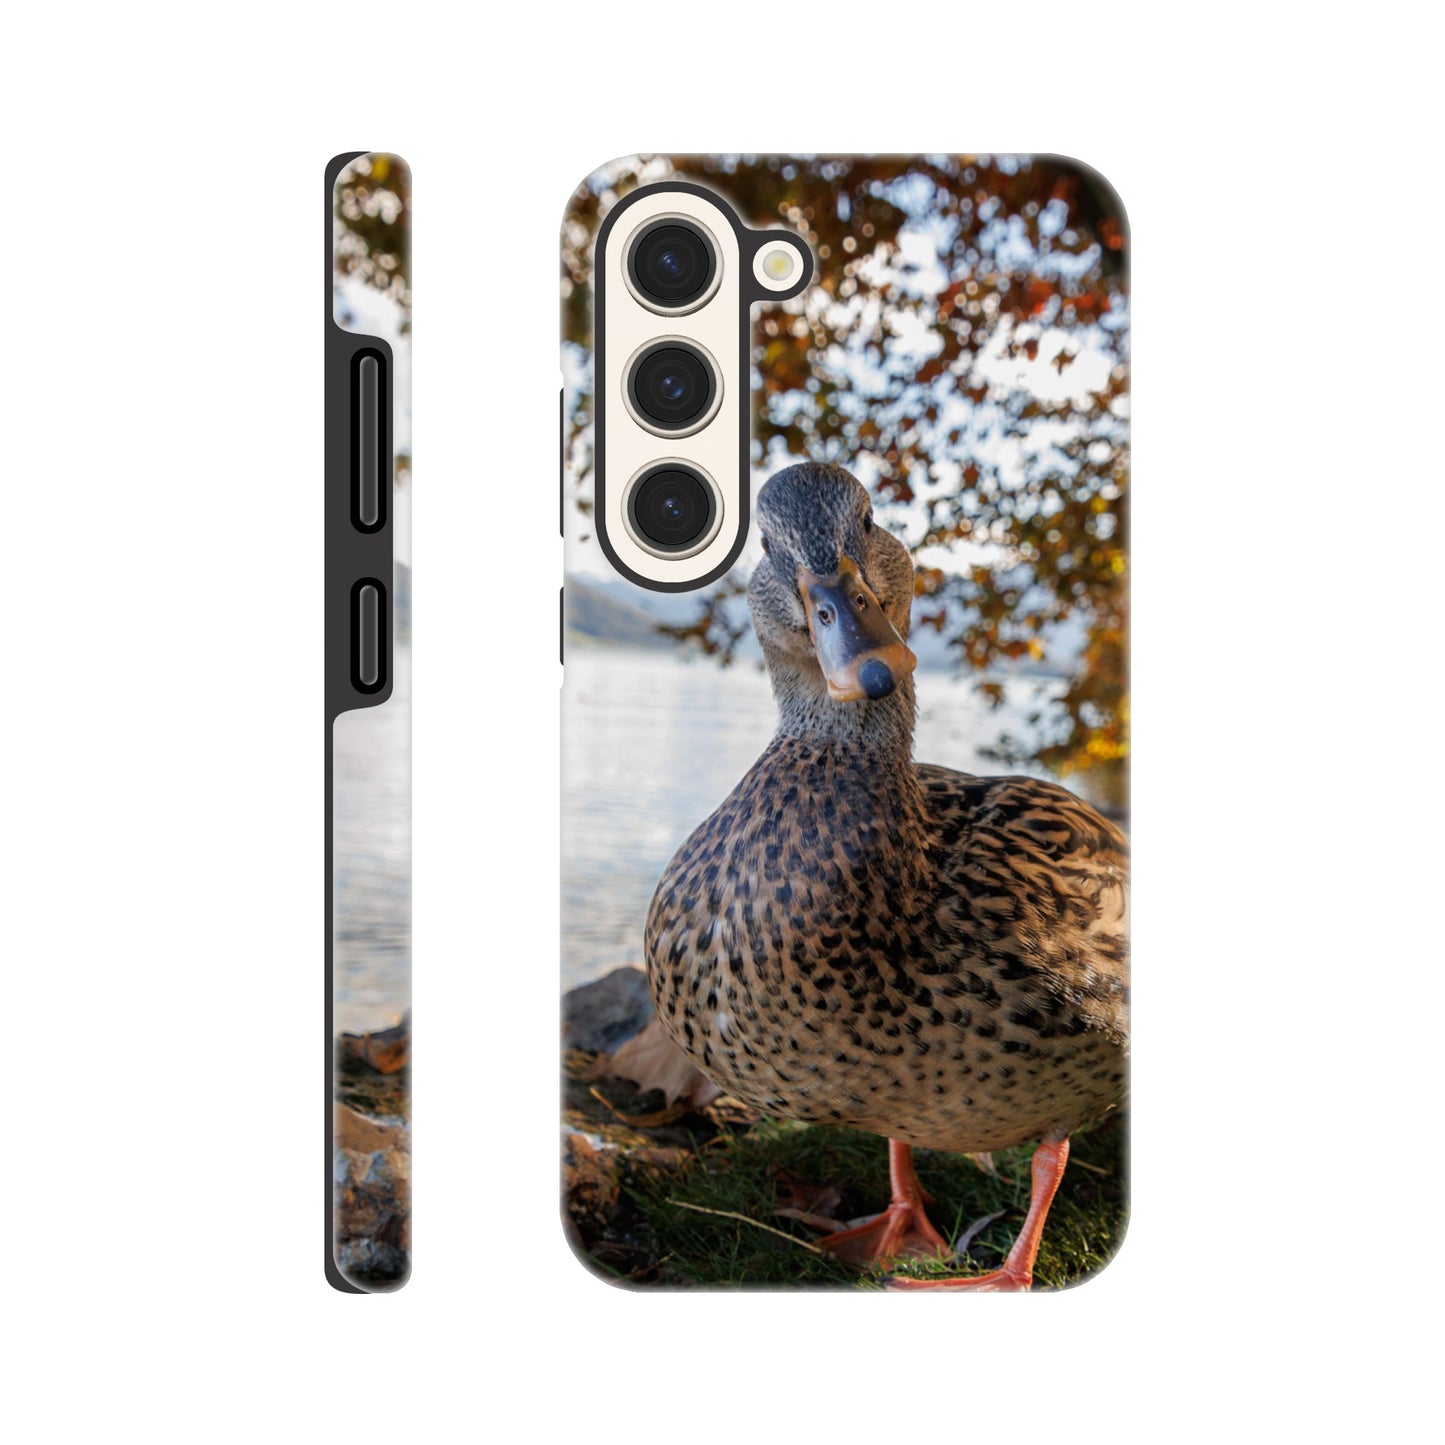 Autumnal duck idyll hard shell case mobile phone case for iPhone and Samsung 